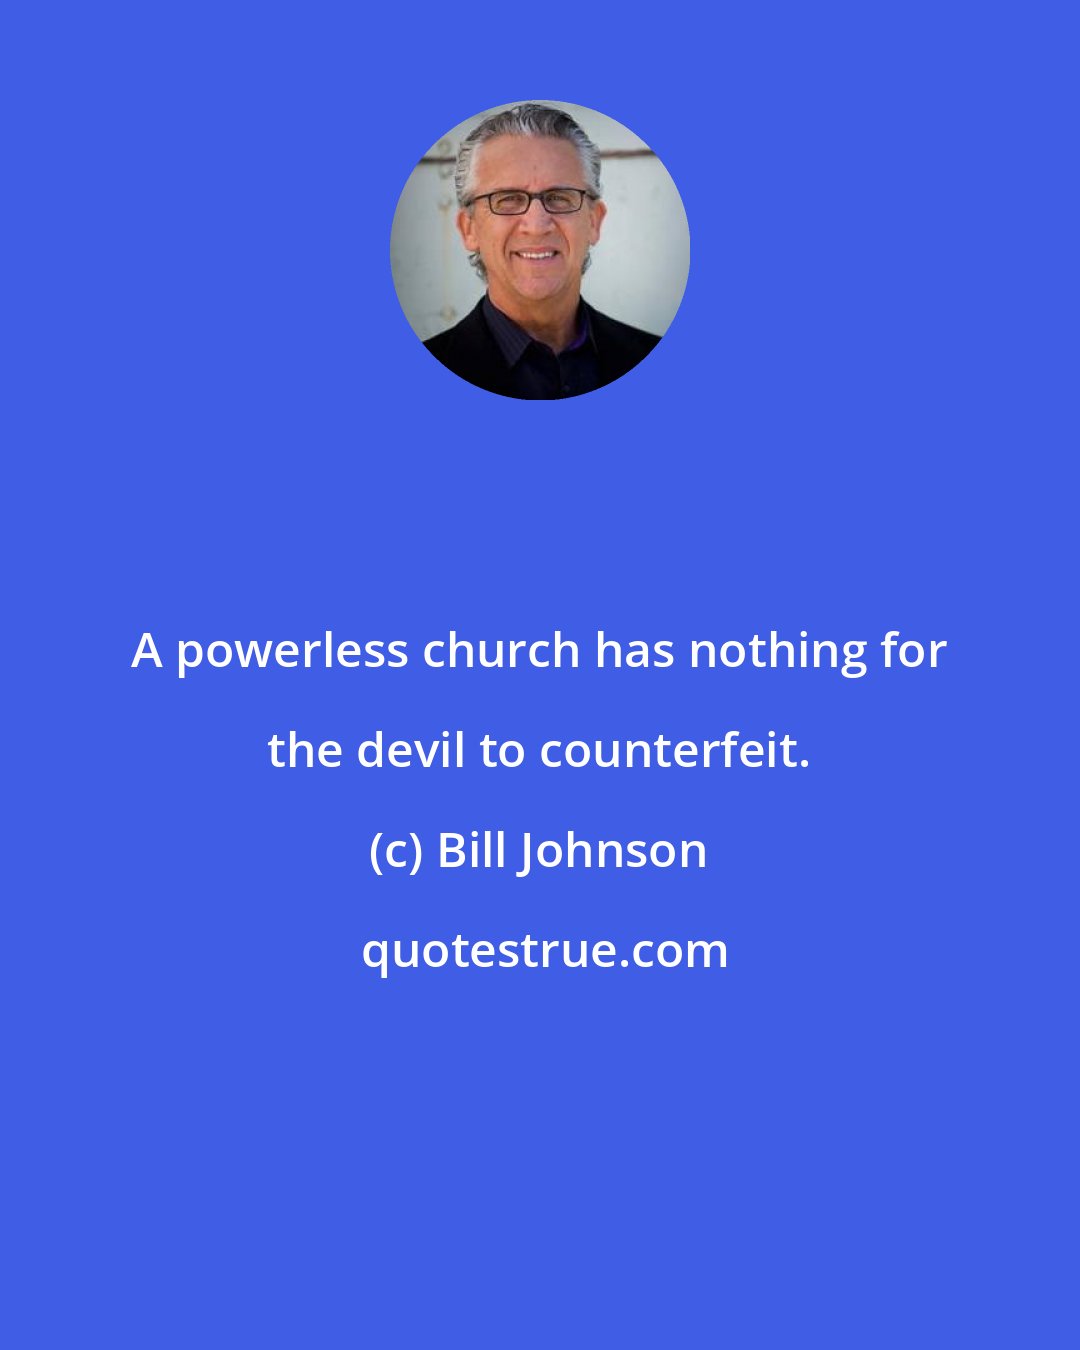 Bill Johnson: A powerless church has nothing for the devil to counterfeit.